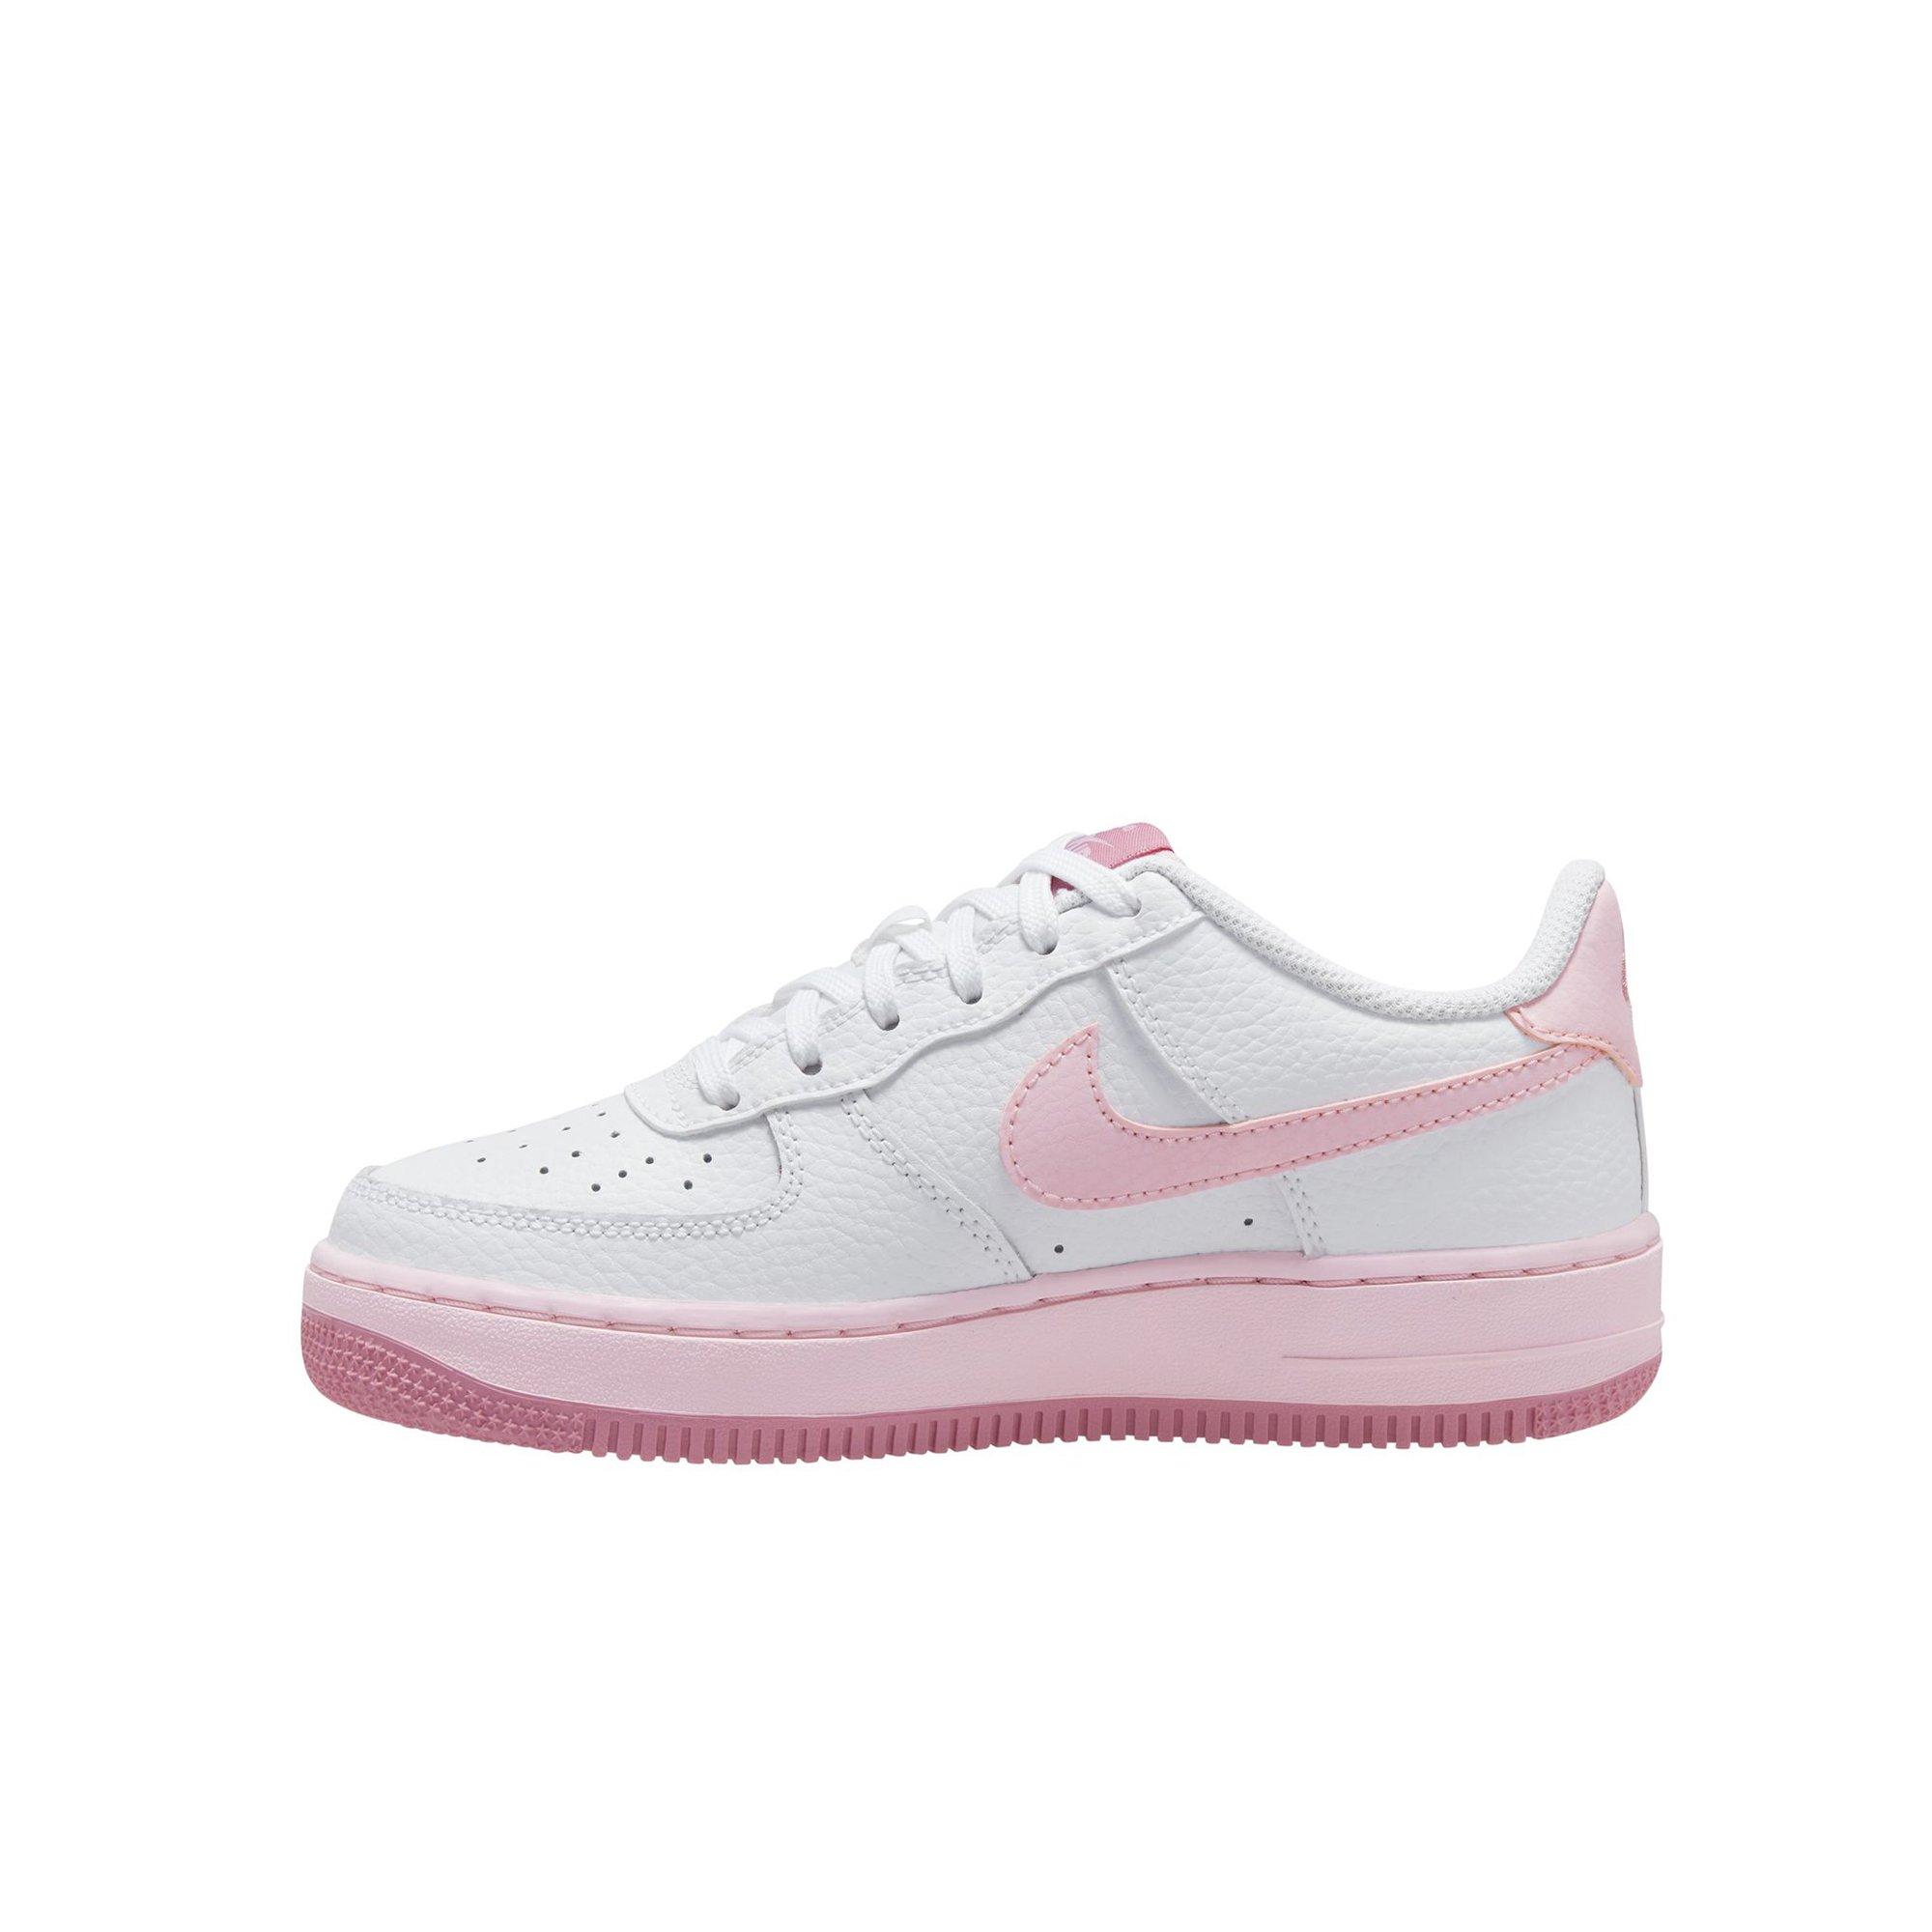 pink lace air force 1